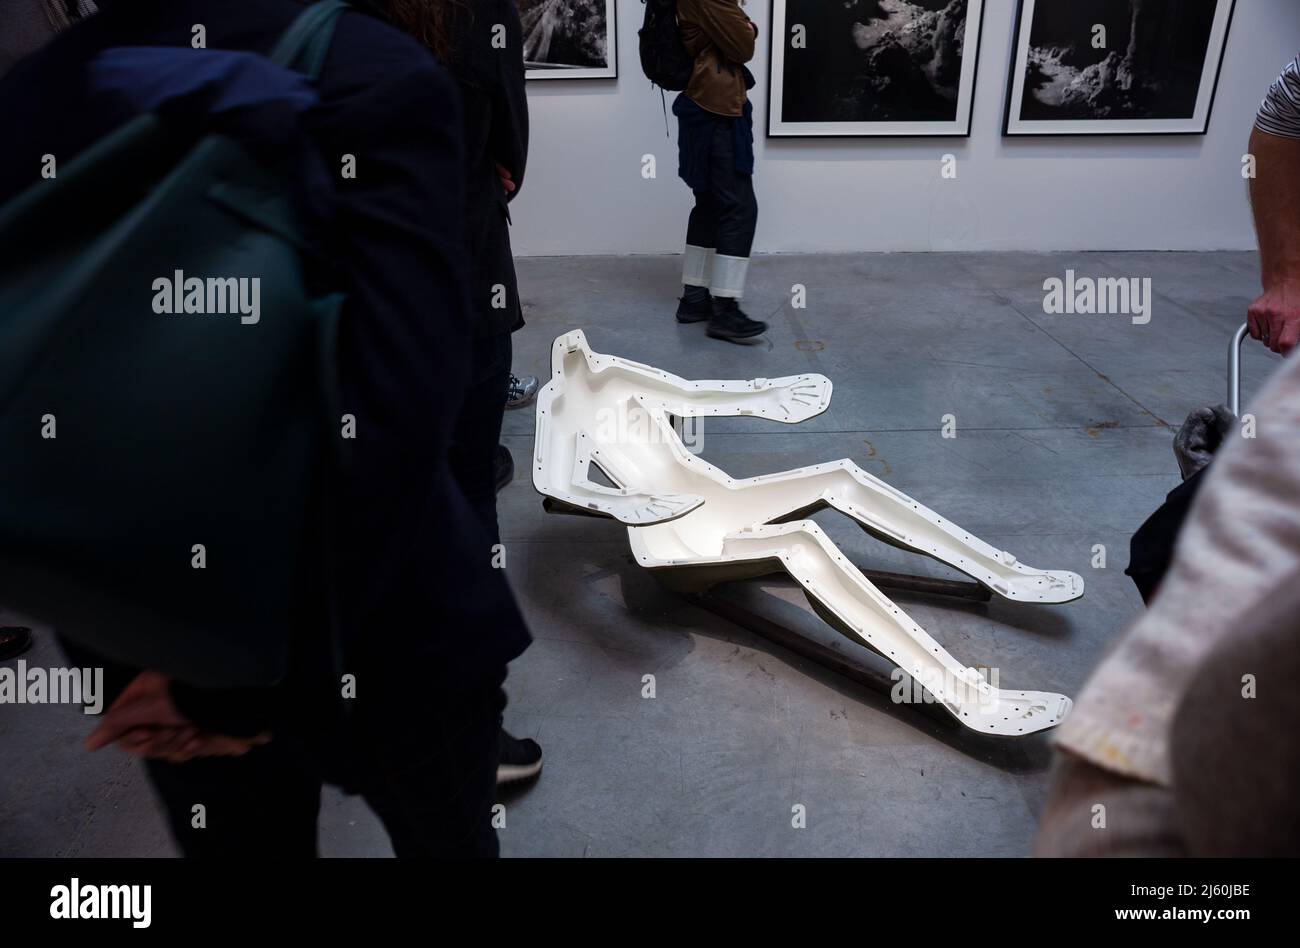 VENICE, ITALY - April 20: Installation titled Maintenancer by Sidsel Meineche Hansen at the 59th International Art exhibition of Venice biennale on Ap Stock Photo